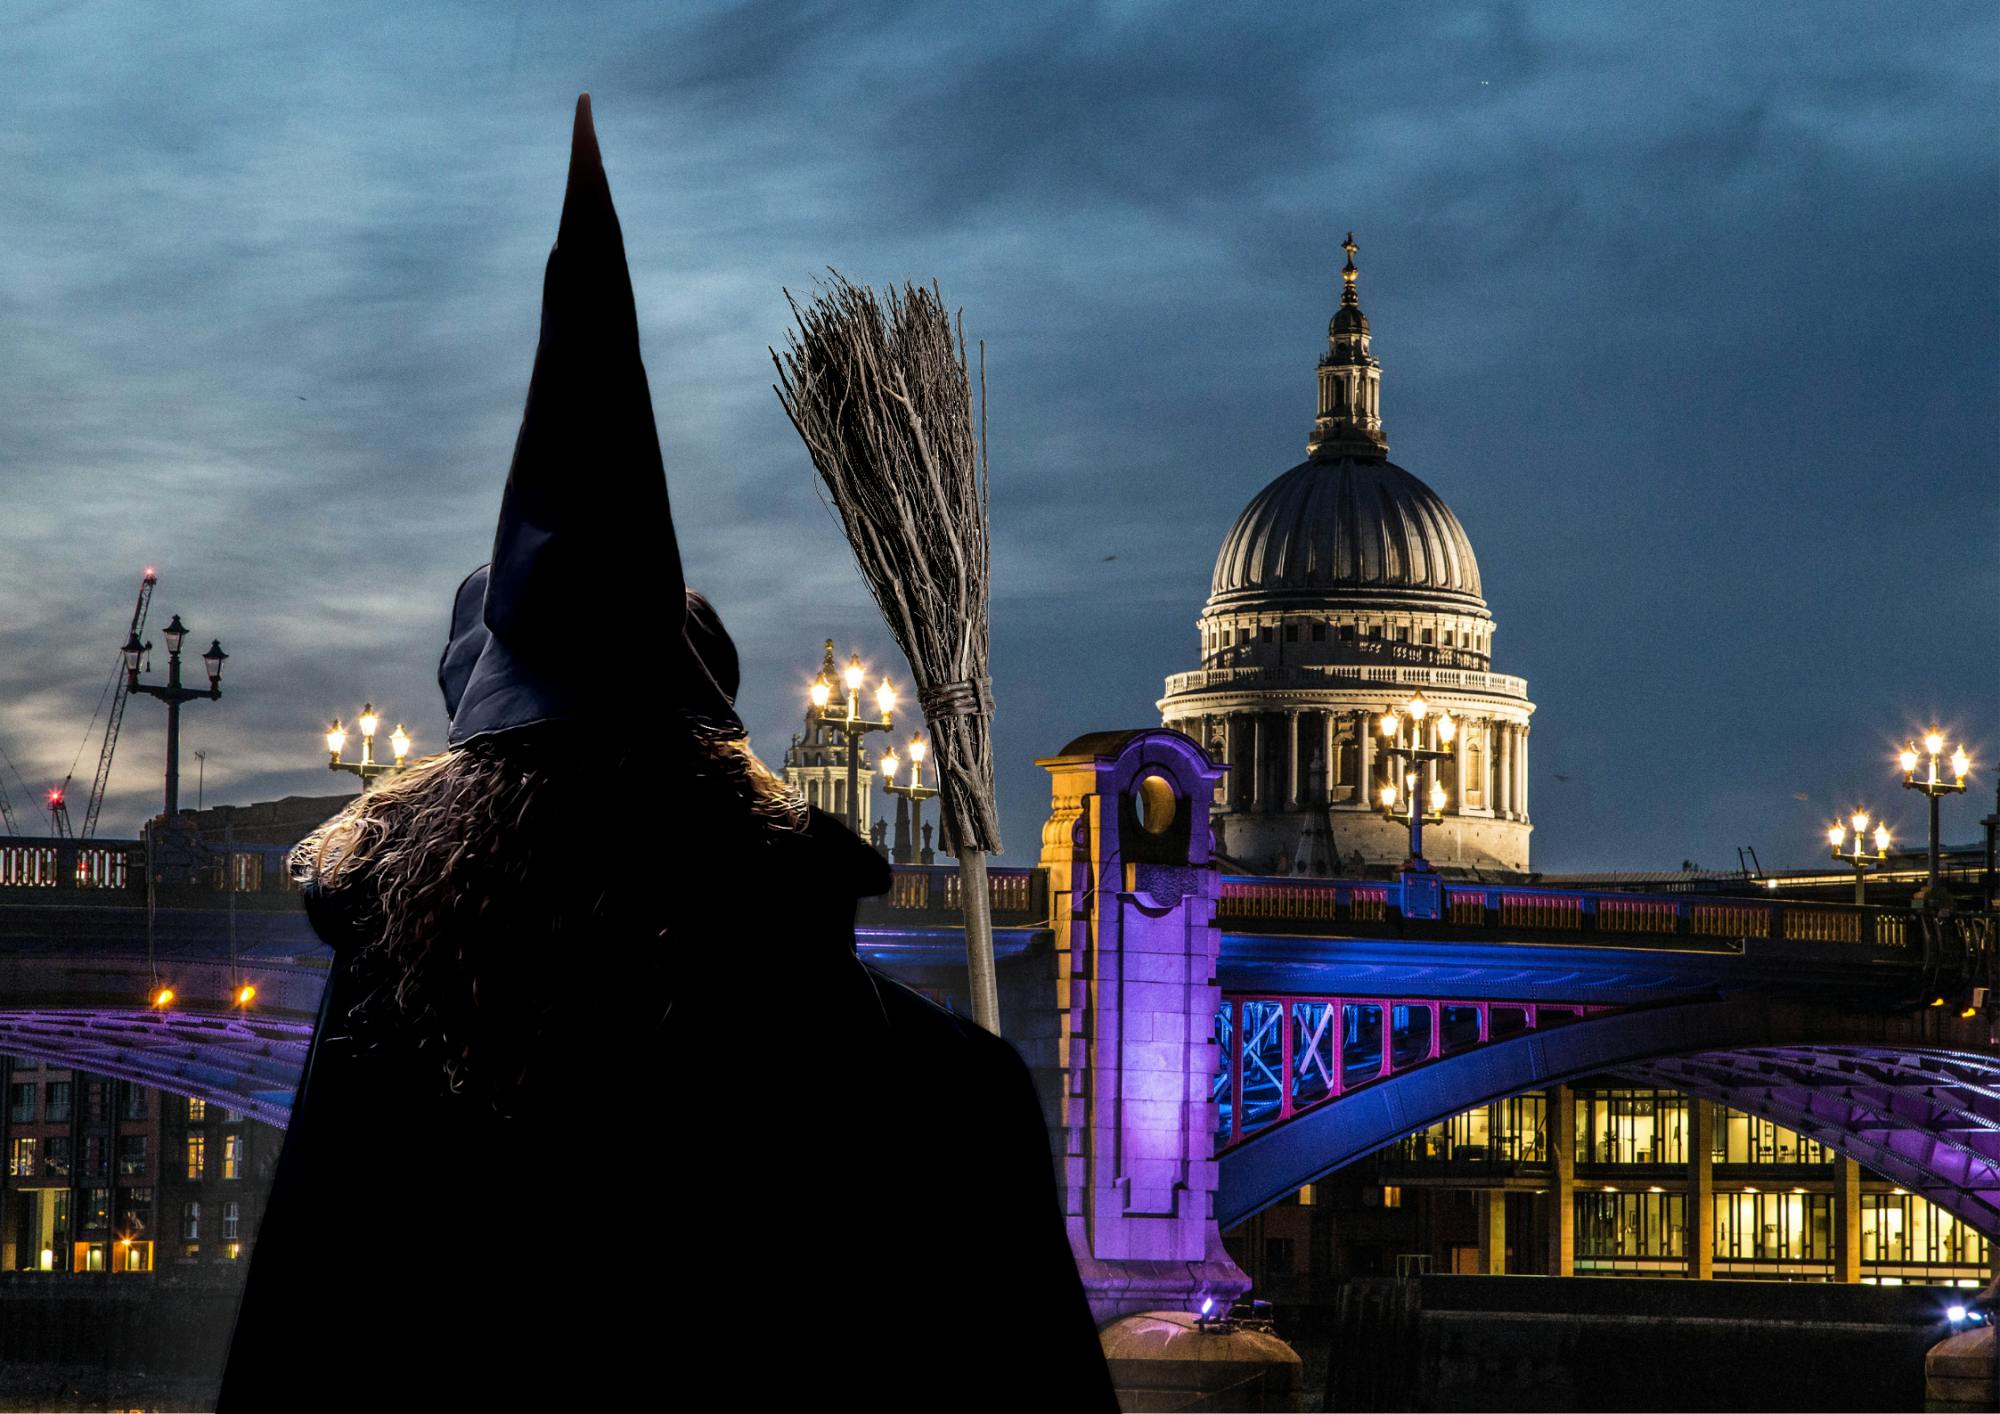 London witches and history walking tour Musement